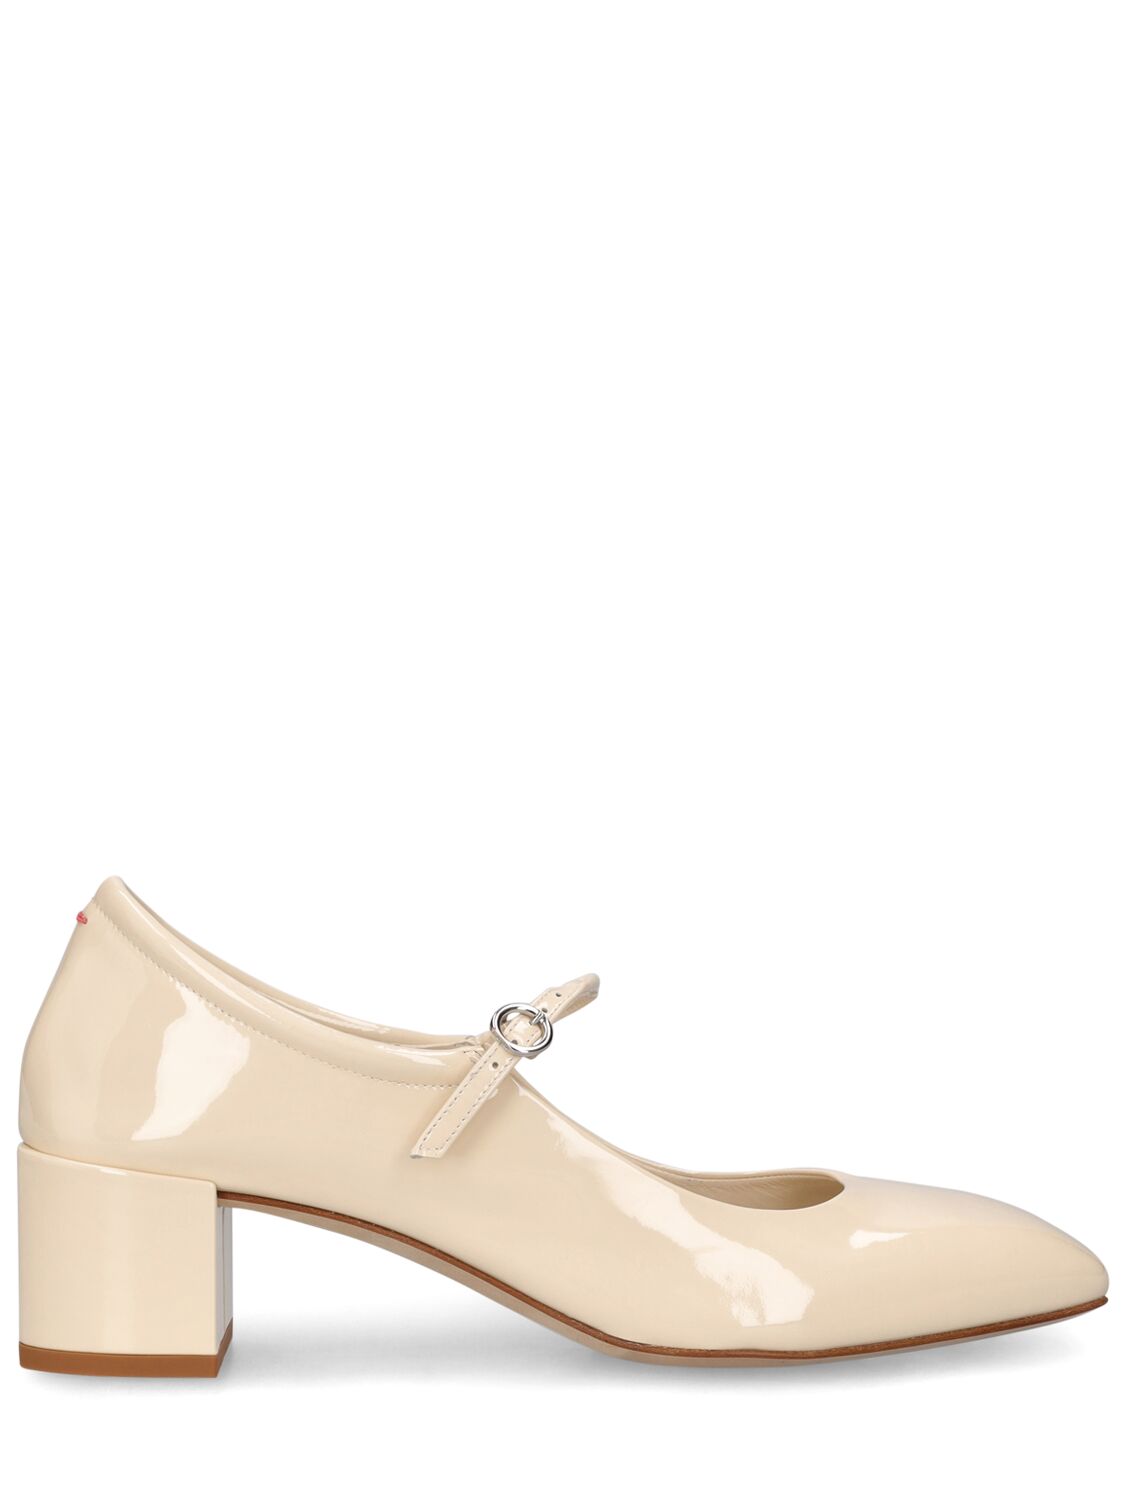 Aeyde Aline 45mm Leather Pumps In Cream